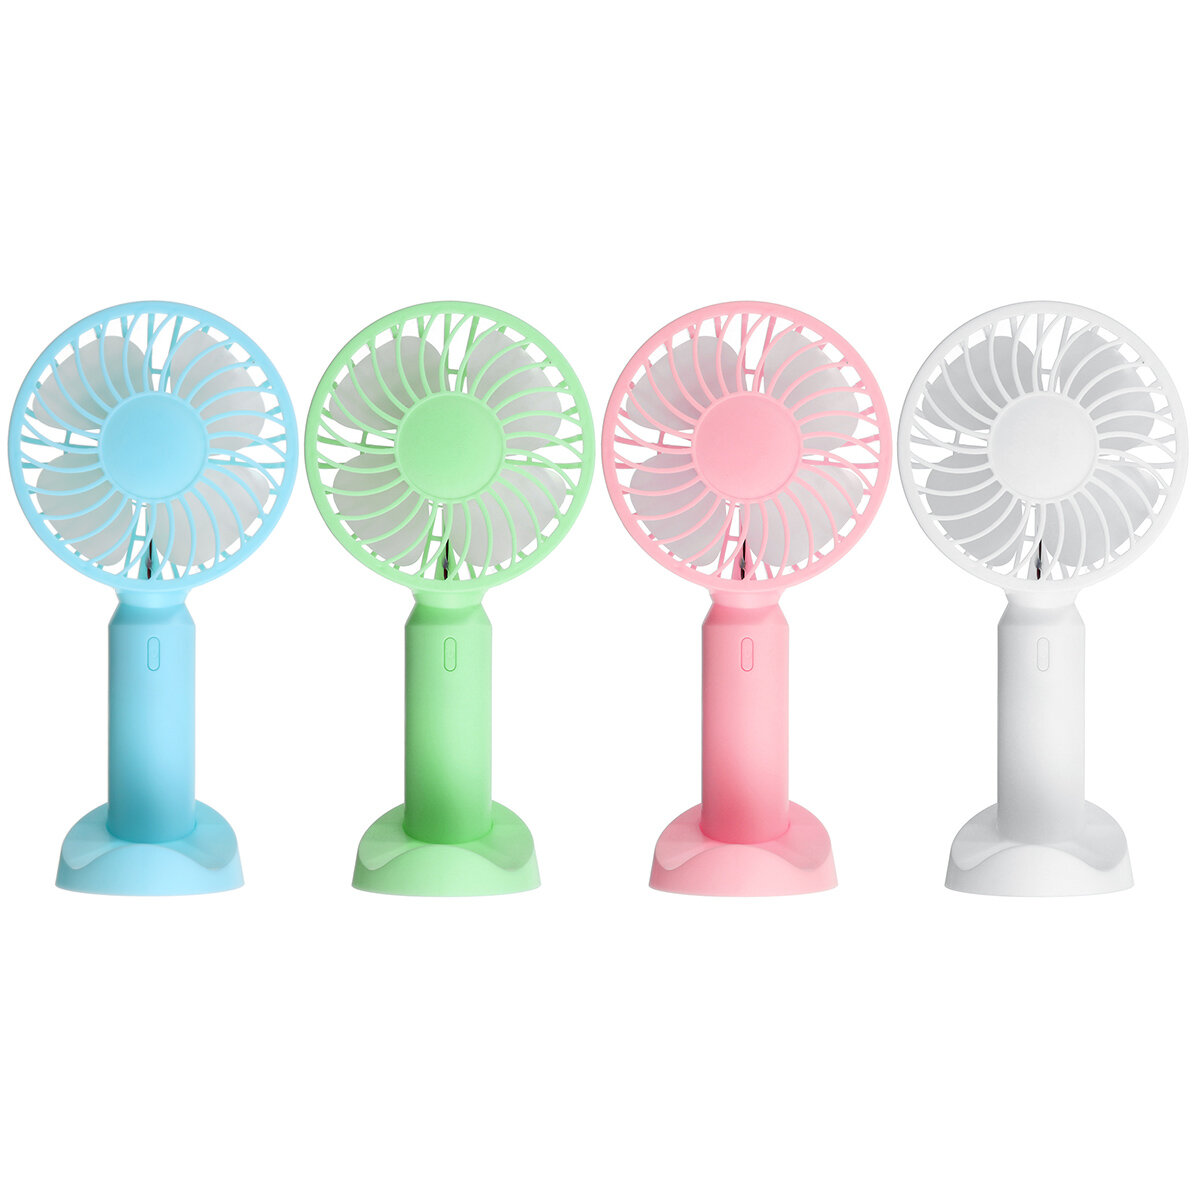 Bakeey Mini Handheld Charging Fan Portable Silent 35db Third Gea Wind Speed Micro USB Charging with 